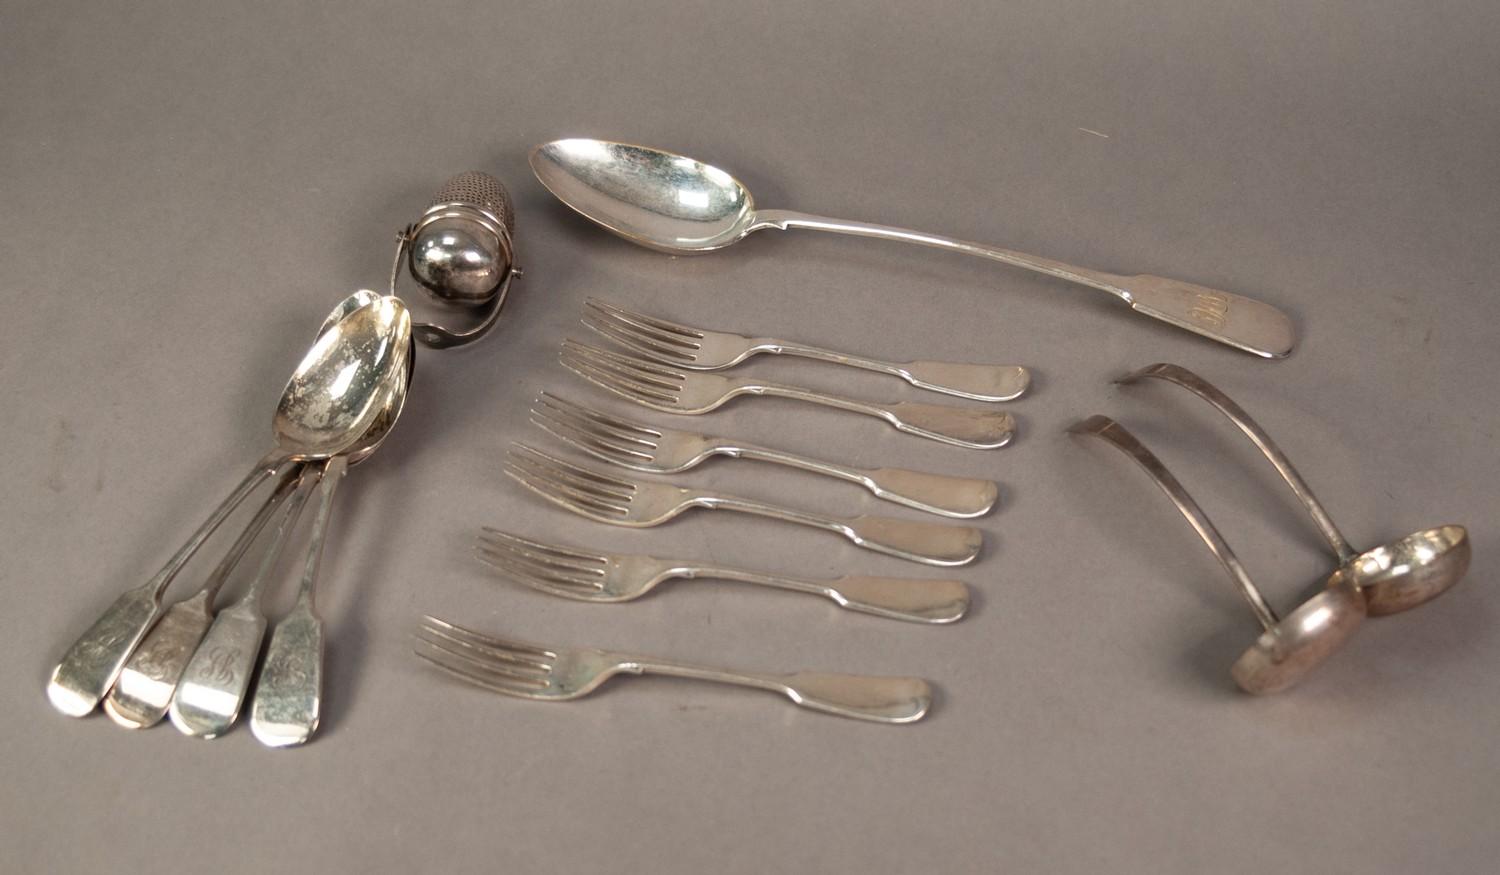 ELEVEN PIECES OF ELECTROPLATED FIDDLE PATTERN CUTLERY, comprising: GRAVY SPOON, FOUR TABLE SPOONS,